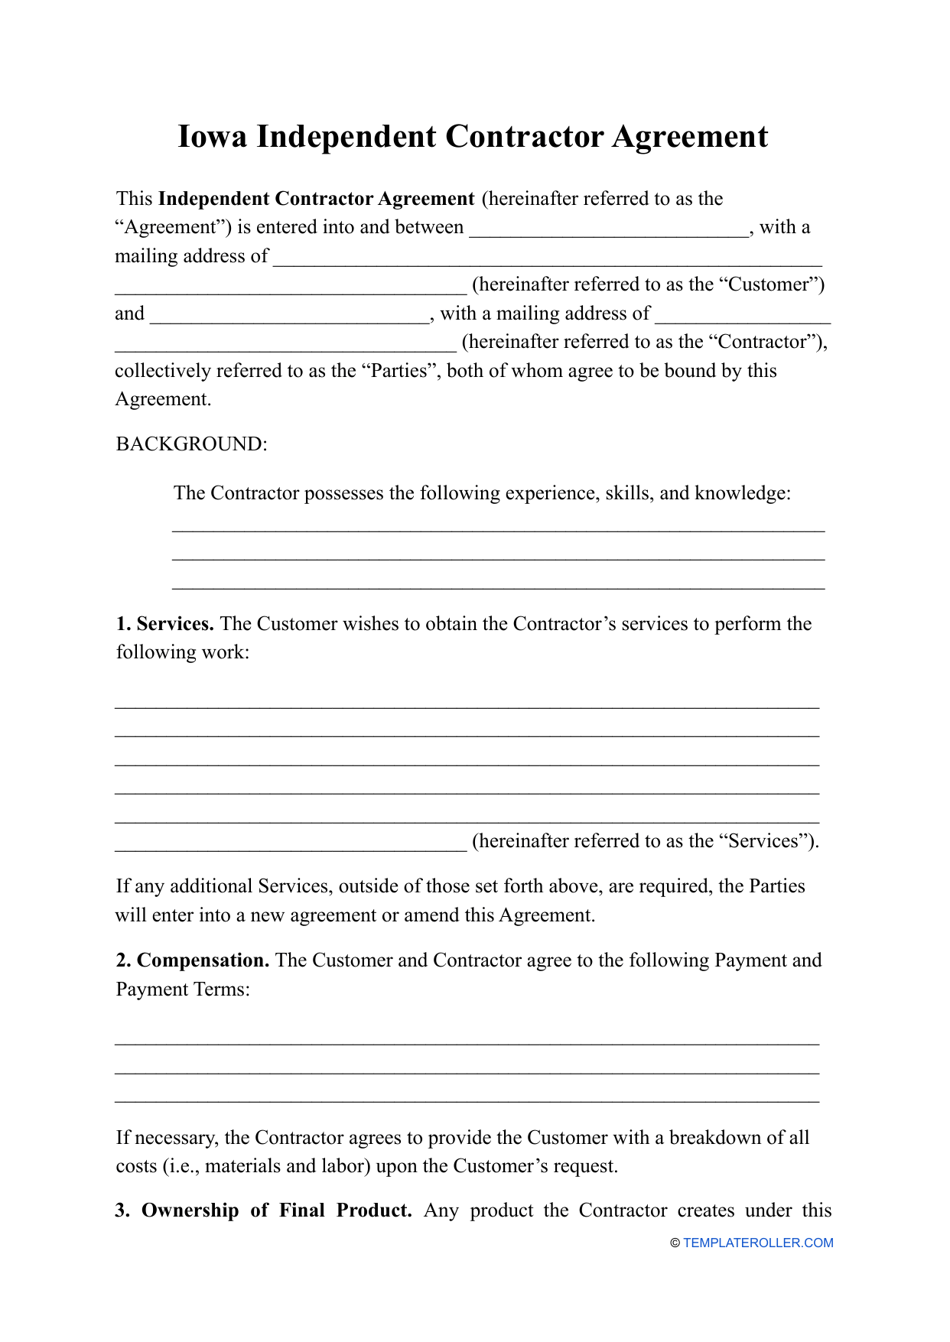 Independent Contractor Agreement Template - Iowa, Page 1